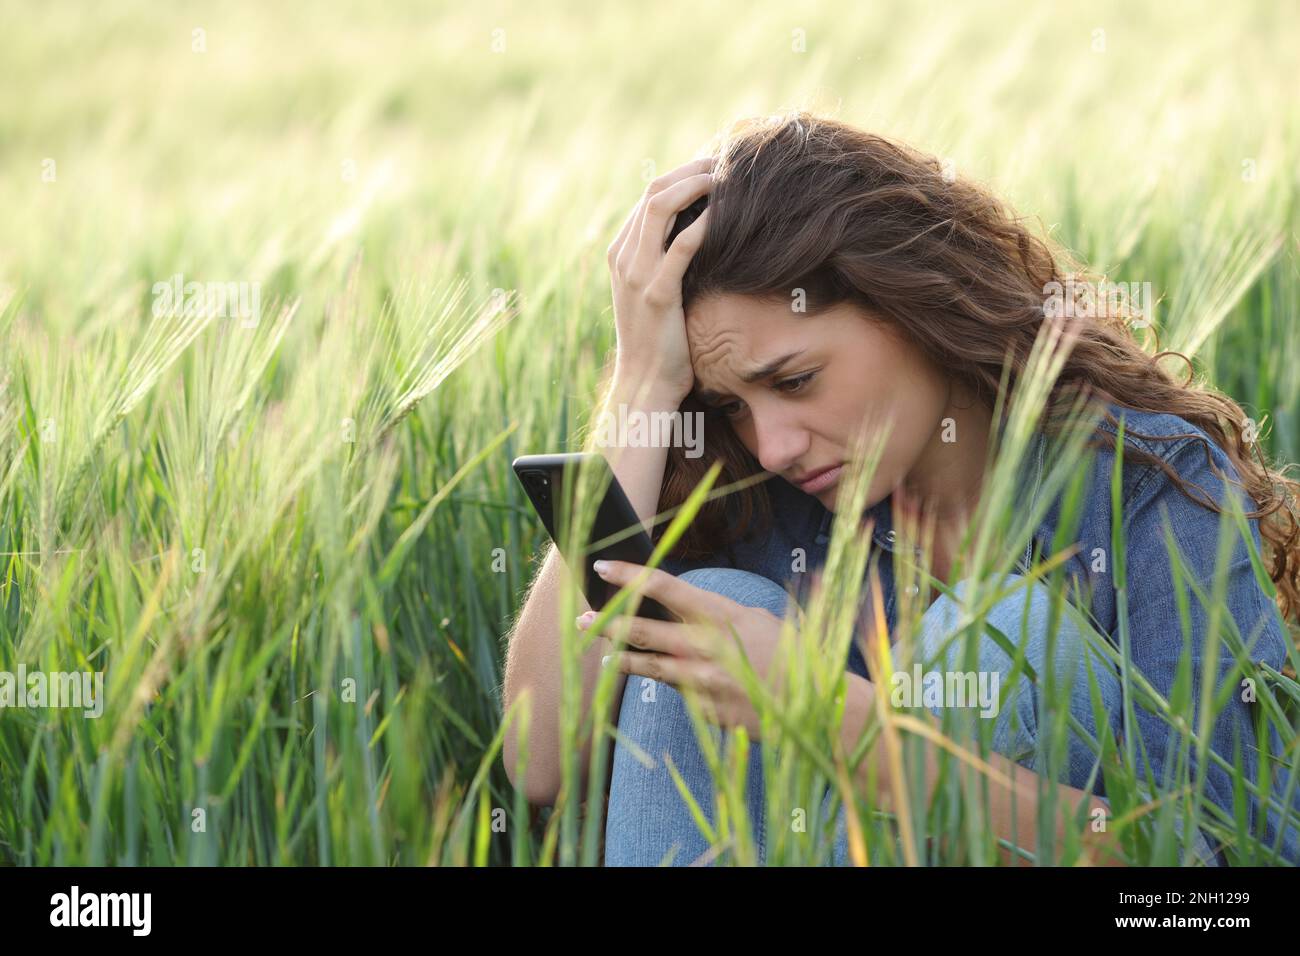 Sad woman reading smart phone chat in a field Stock Photo